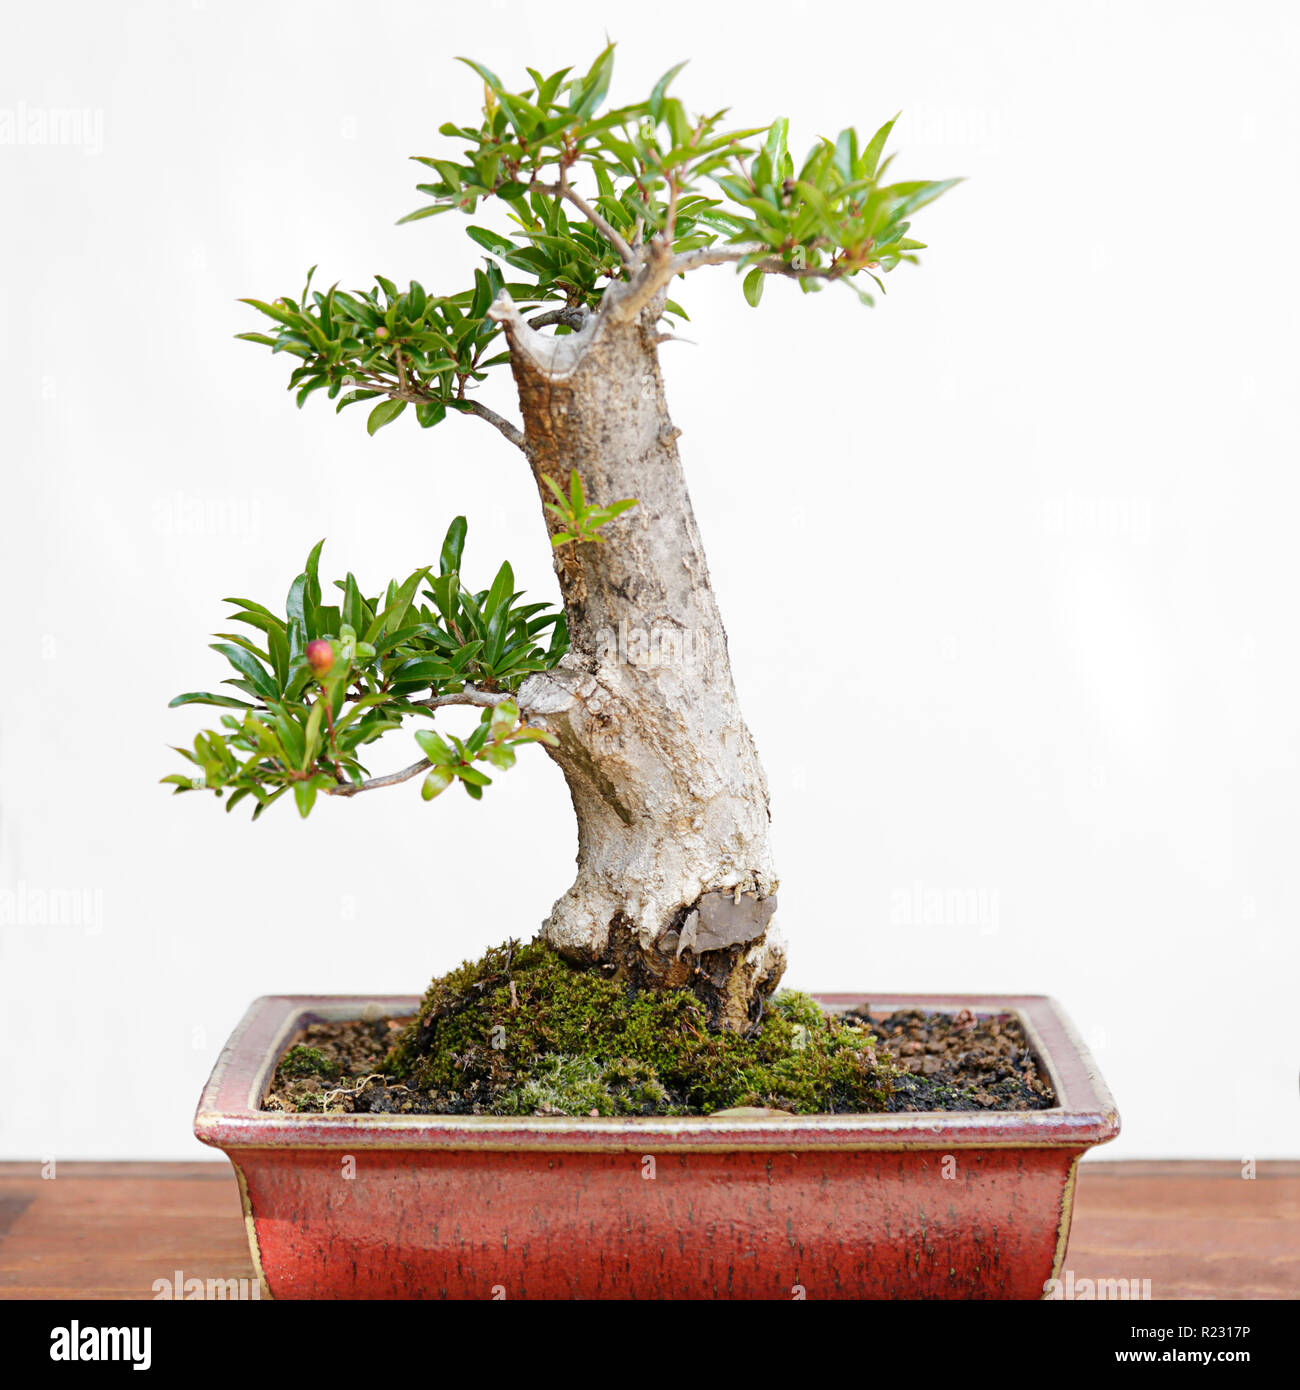 Bonsai Pomegranate Tree High Resolution Stock Photography And Images Alamy